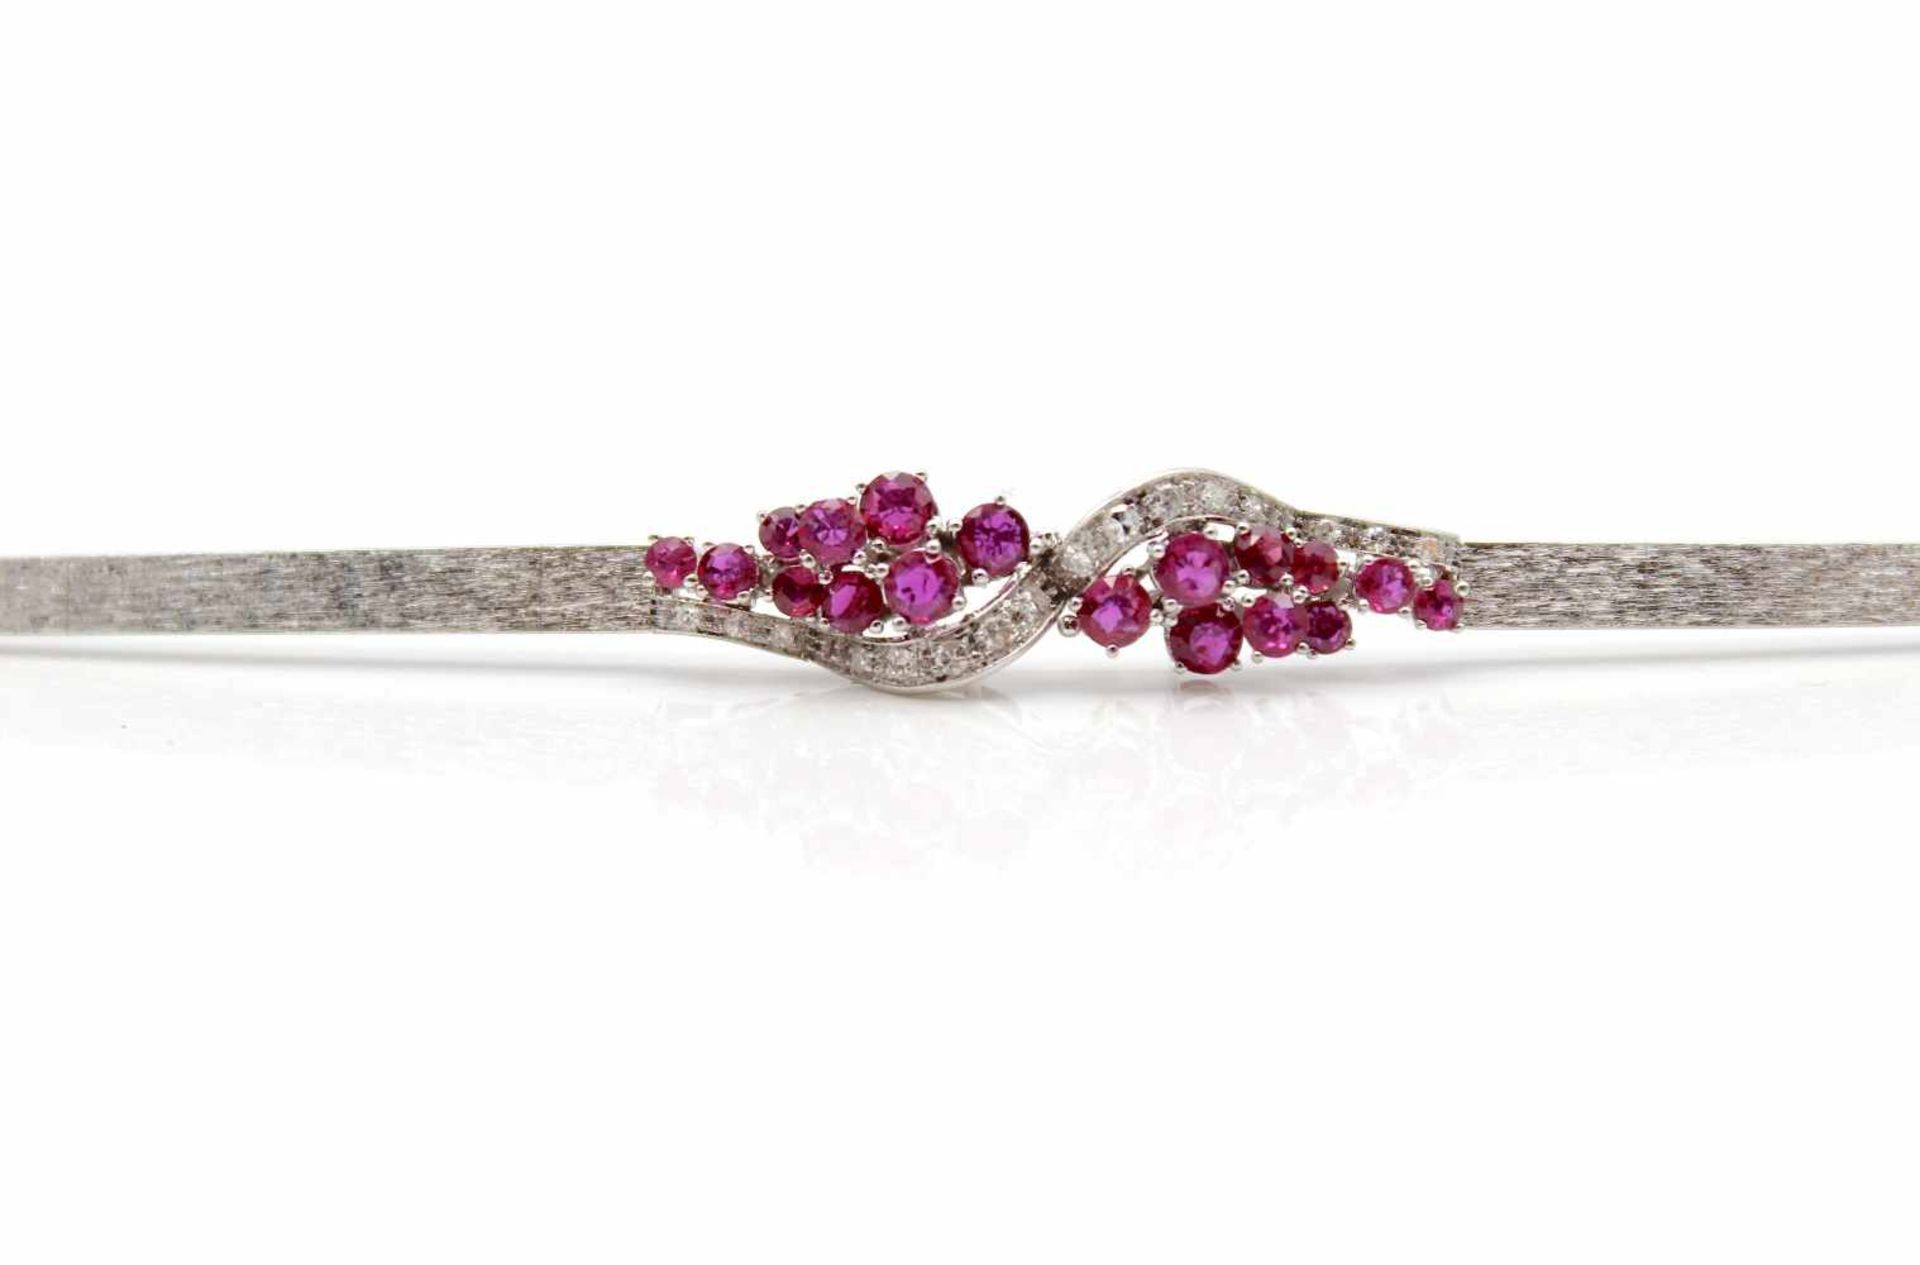 Bracelet in 585 white gold with 18 rubies, total ca. 2.02 ct and 16 diamonds, total ca. 0.27 ct, - Bild 2 aus 3